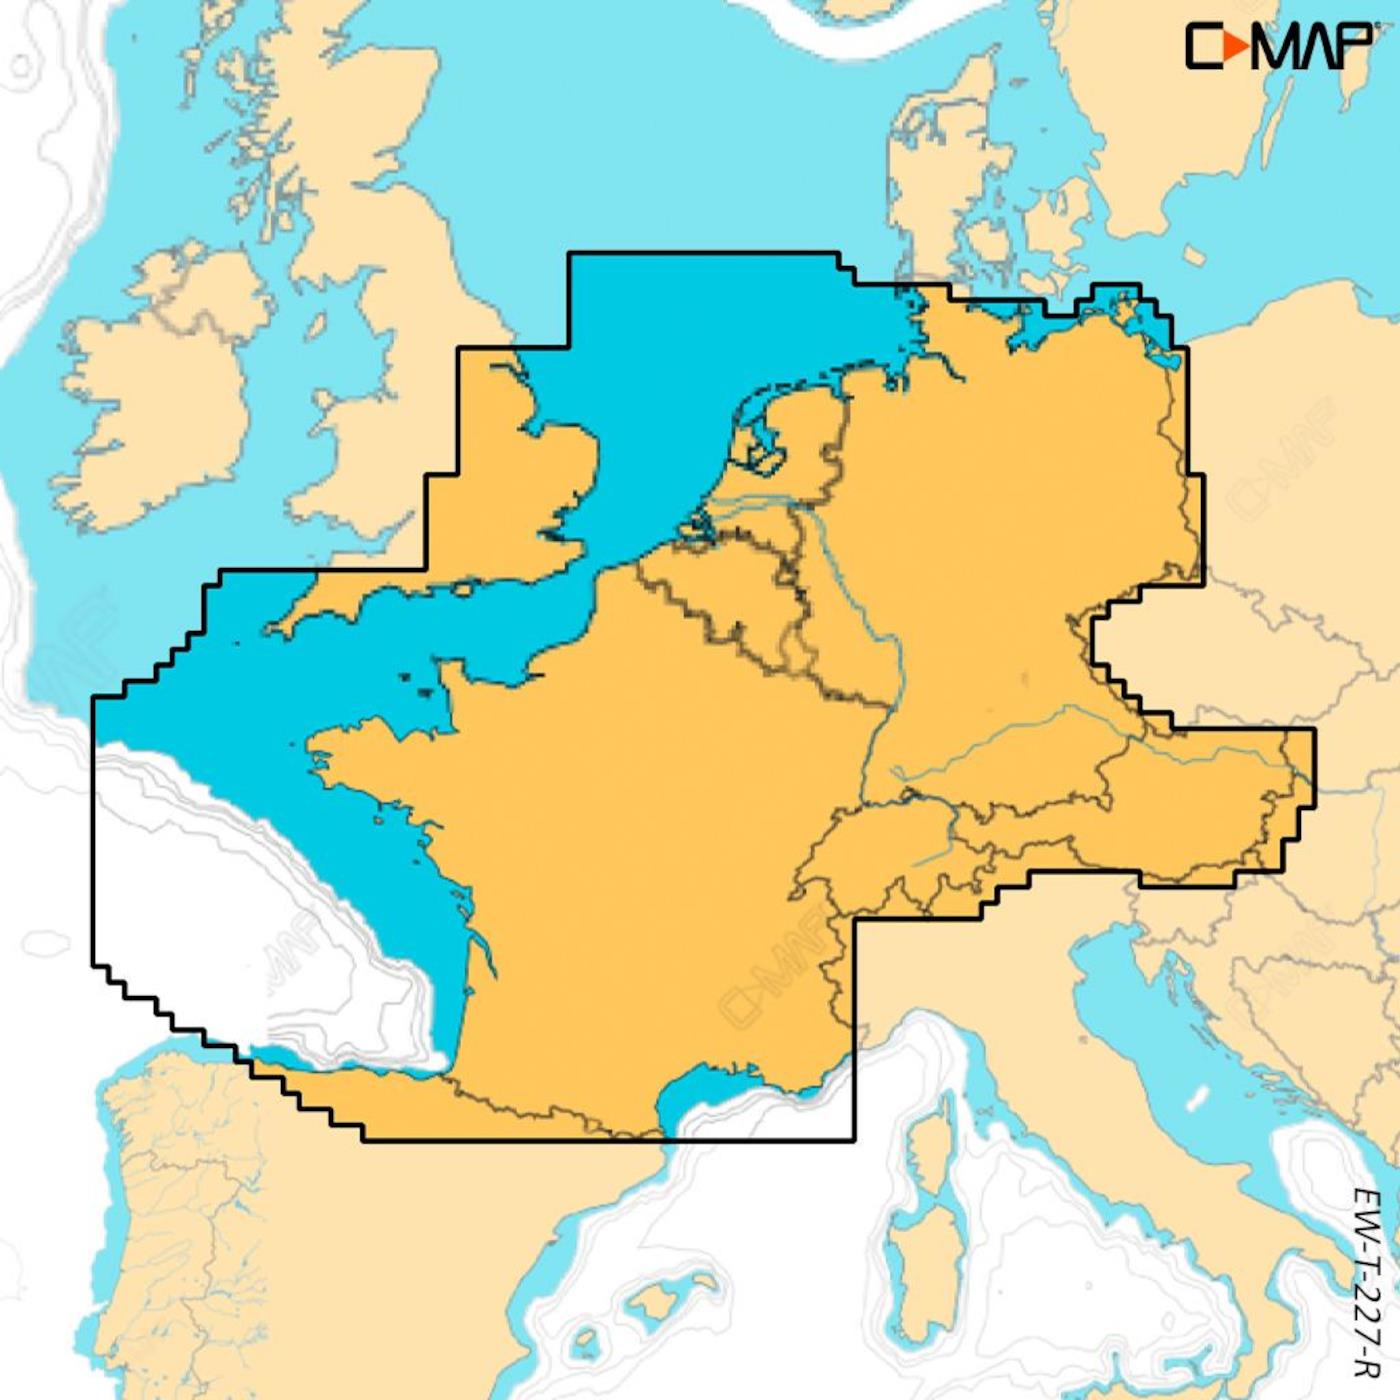 C-MAP Discover X Nordwest-Europa (North-West European Coasts) EW-T-227